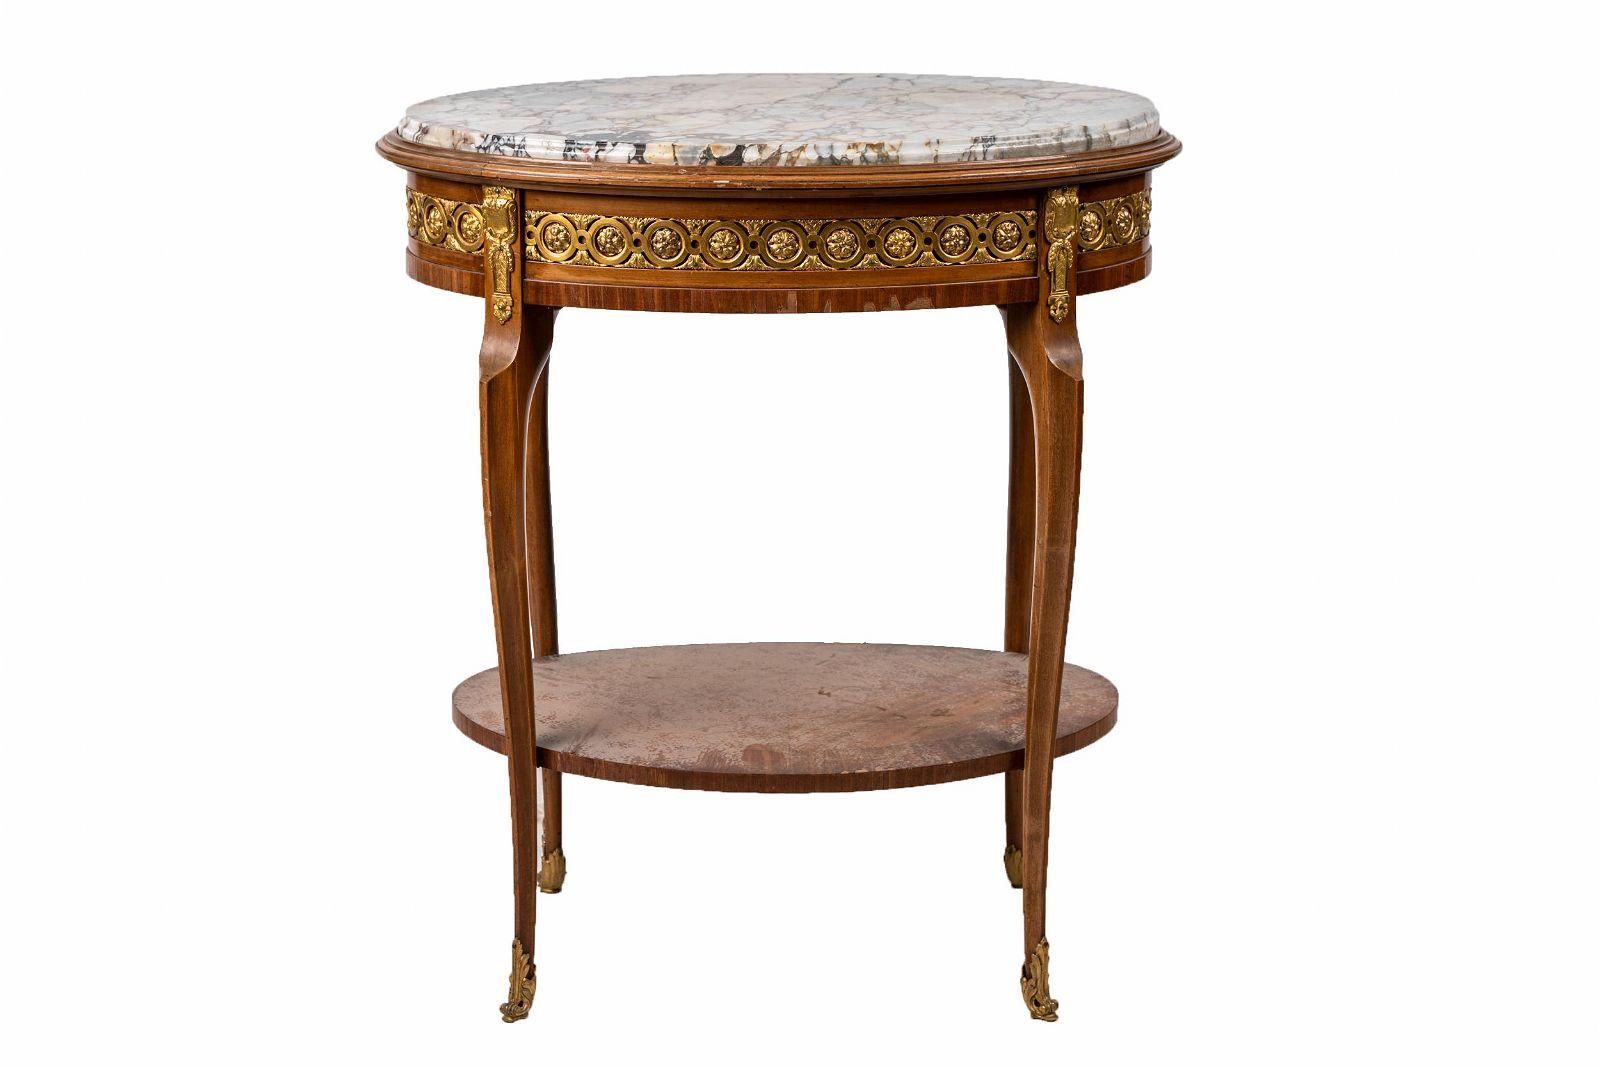 Antique Late 19th Century French Louis XV Transitional Style Walnut Marble Top Gueridon.